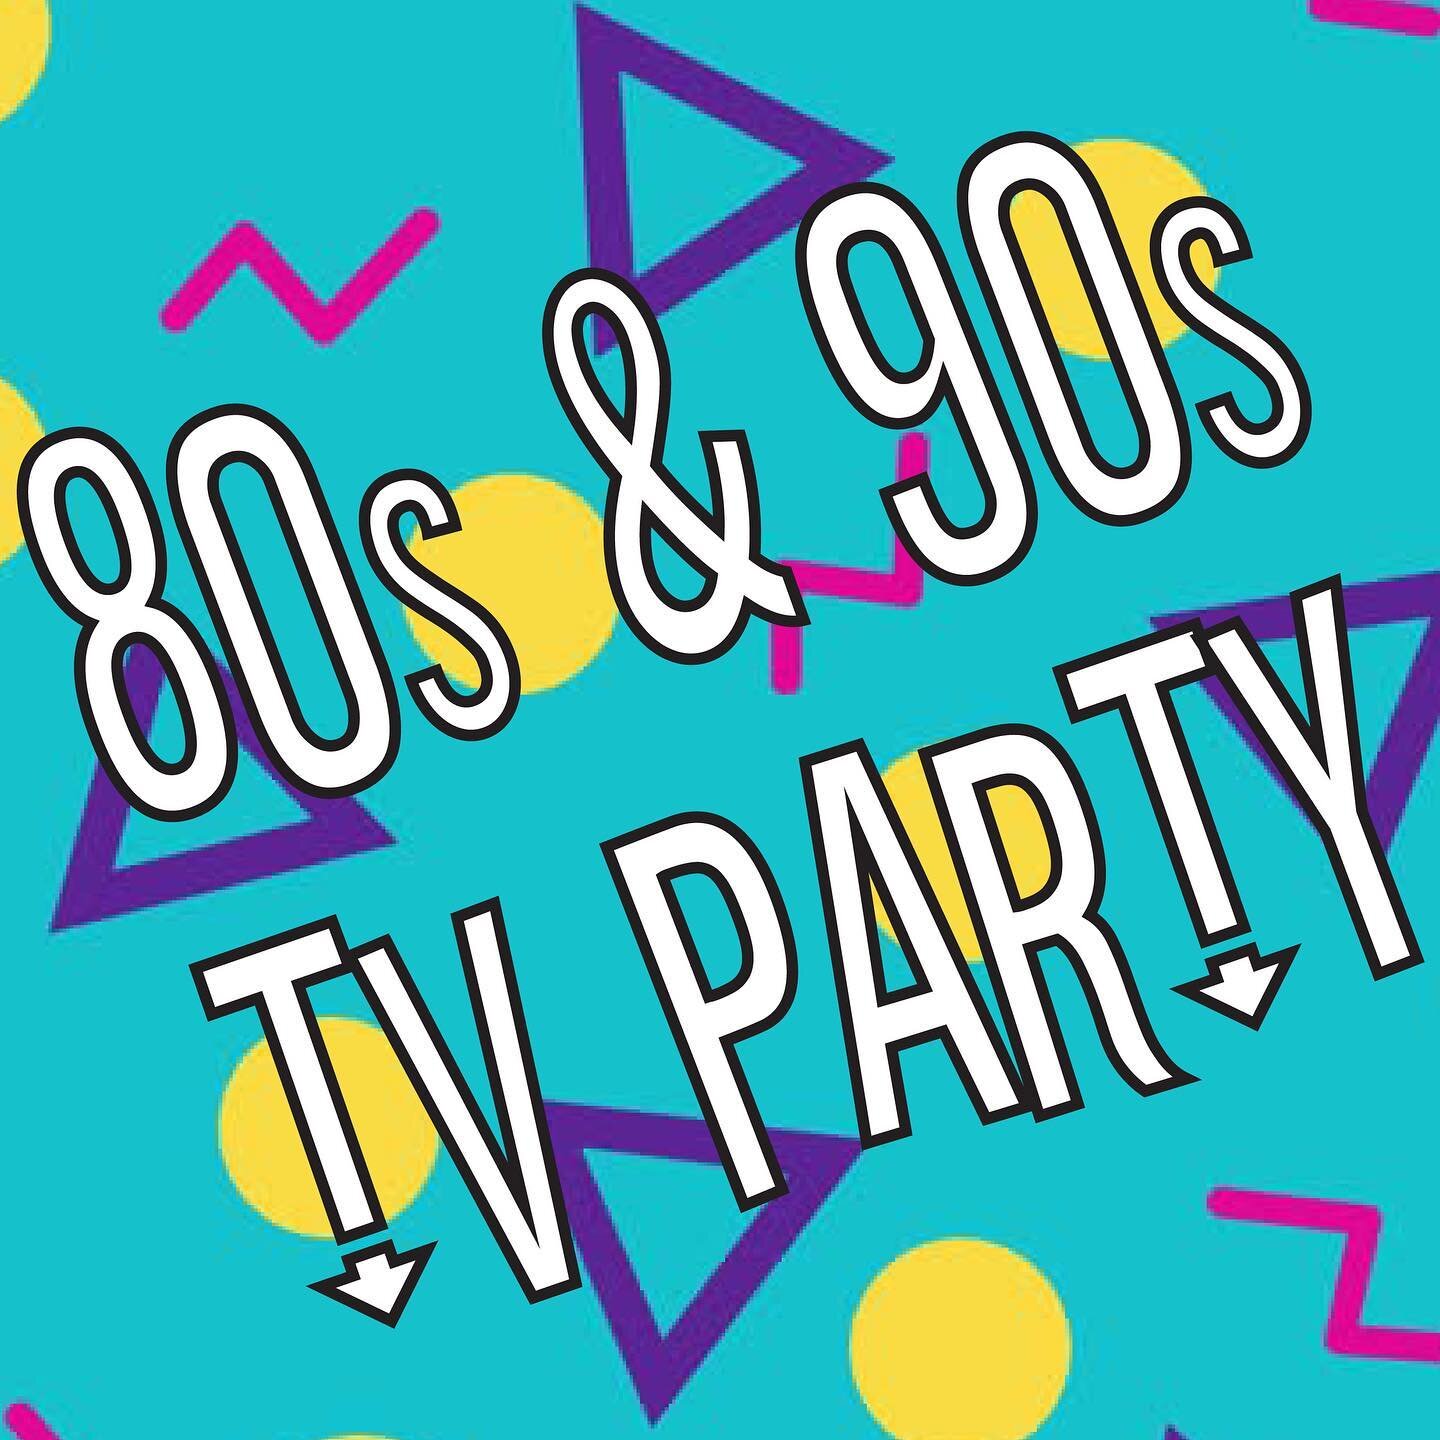 WEDNESDAY (8/17): Come hang for a virtual night of watching old sitcom episodes from the 80s and 90s! 8pm EDT 🎟 via bio!